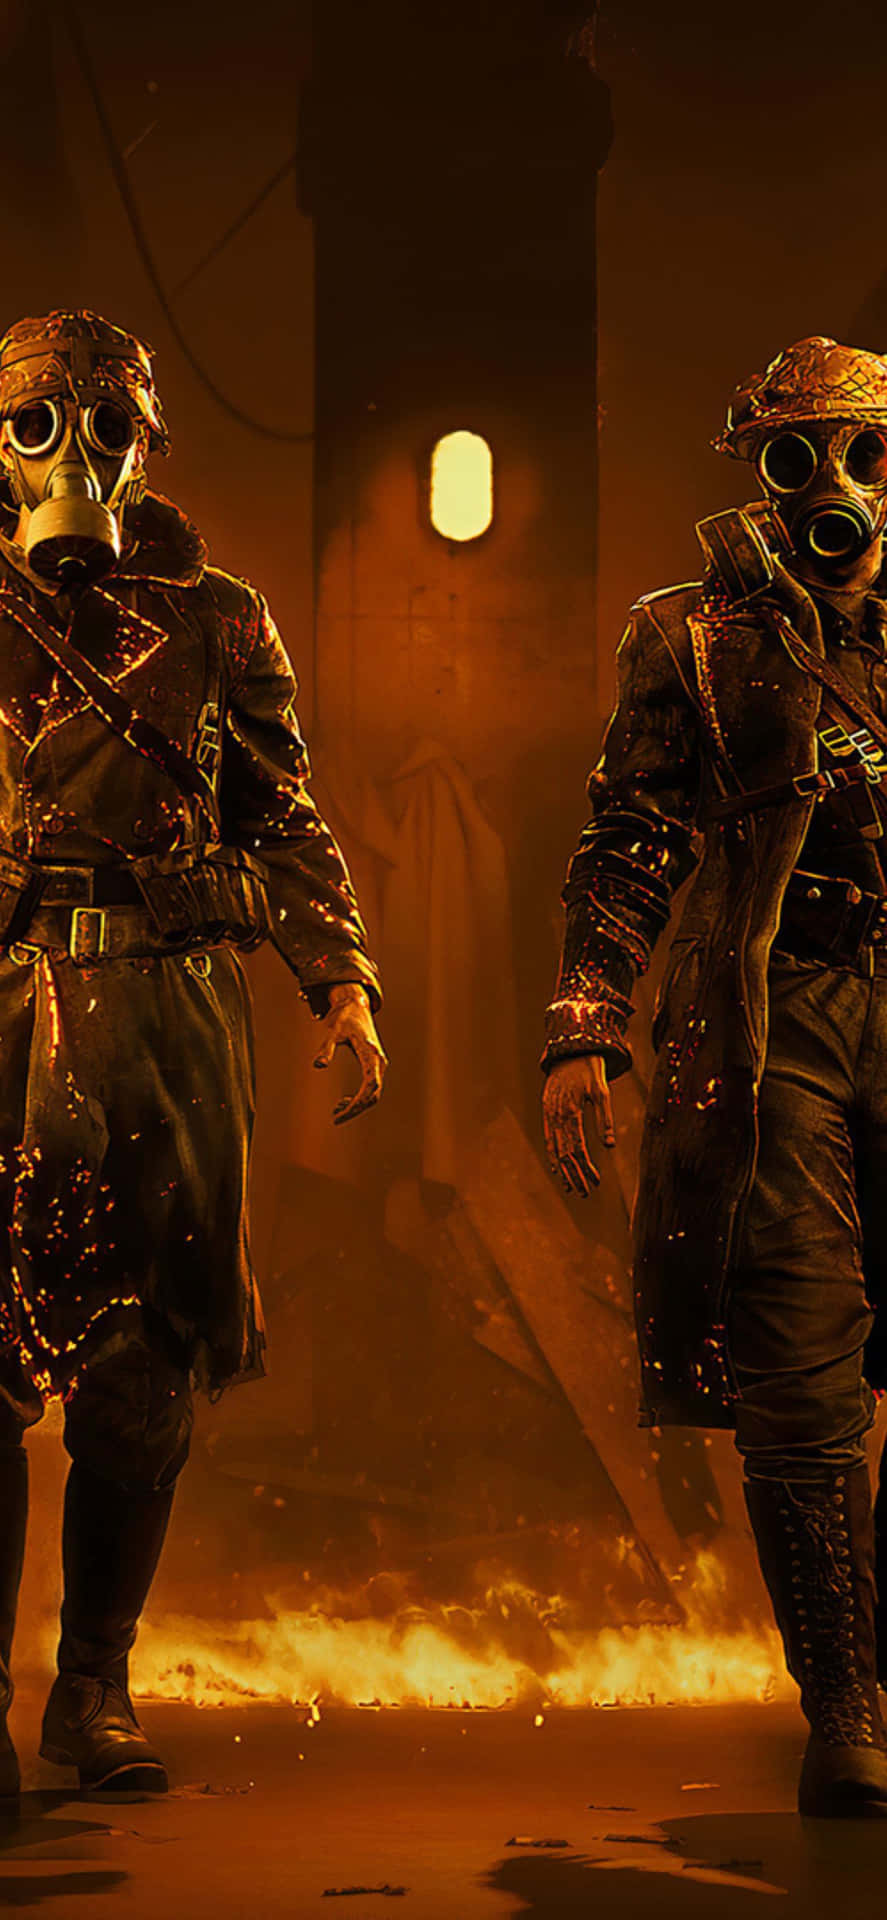 Iphone Xs Max Battlefield V Masked Soldiers Background